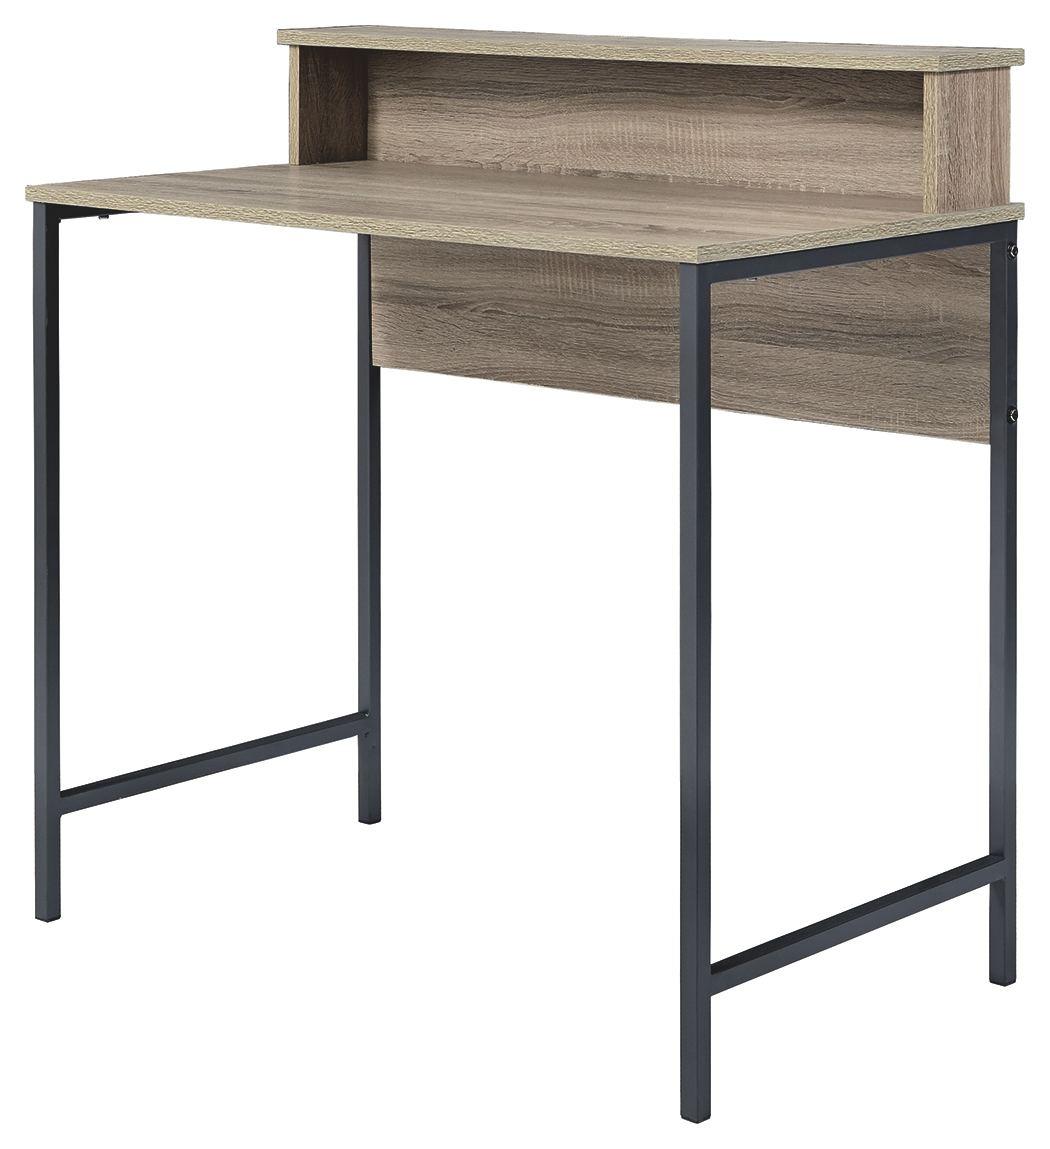 Titania - Light Brown / Gunmetal - Home Office Small Desk Tony's Home Furnishings Furniture. Beds. Dressers. Sofas.